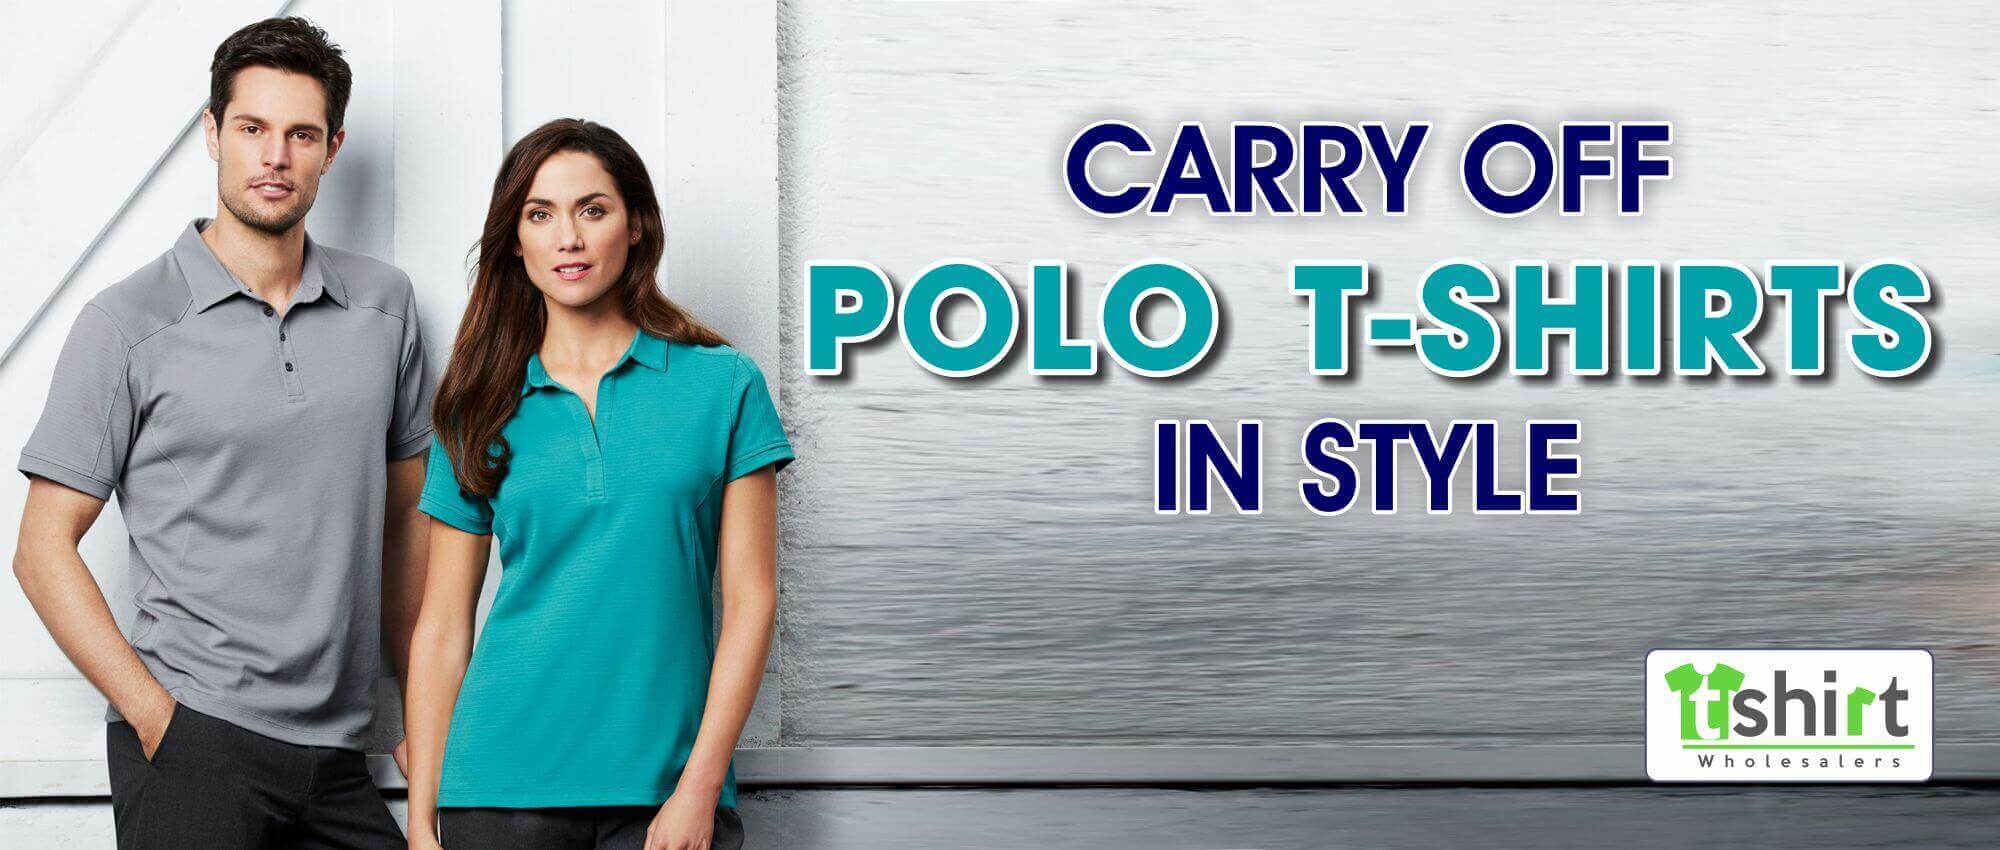 CARRY OFF POLO T-SHIRTS IN STYLE